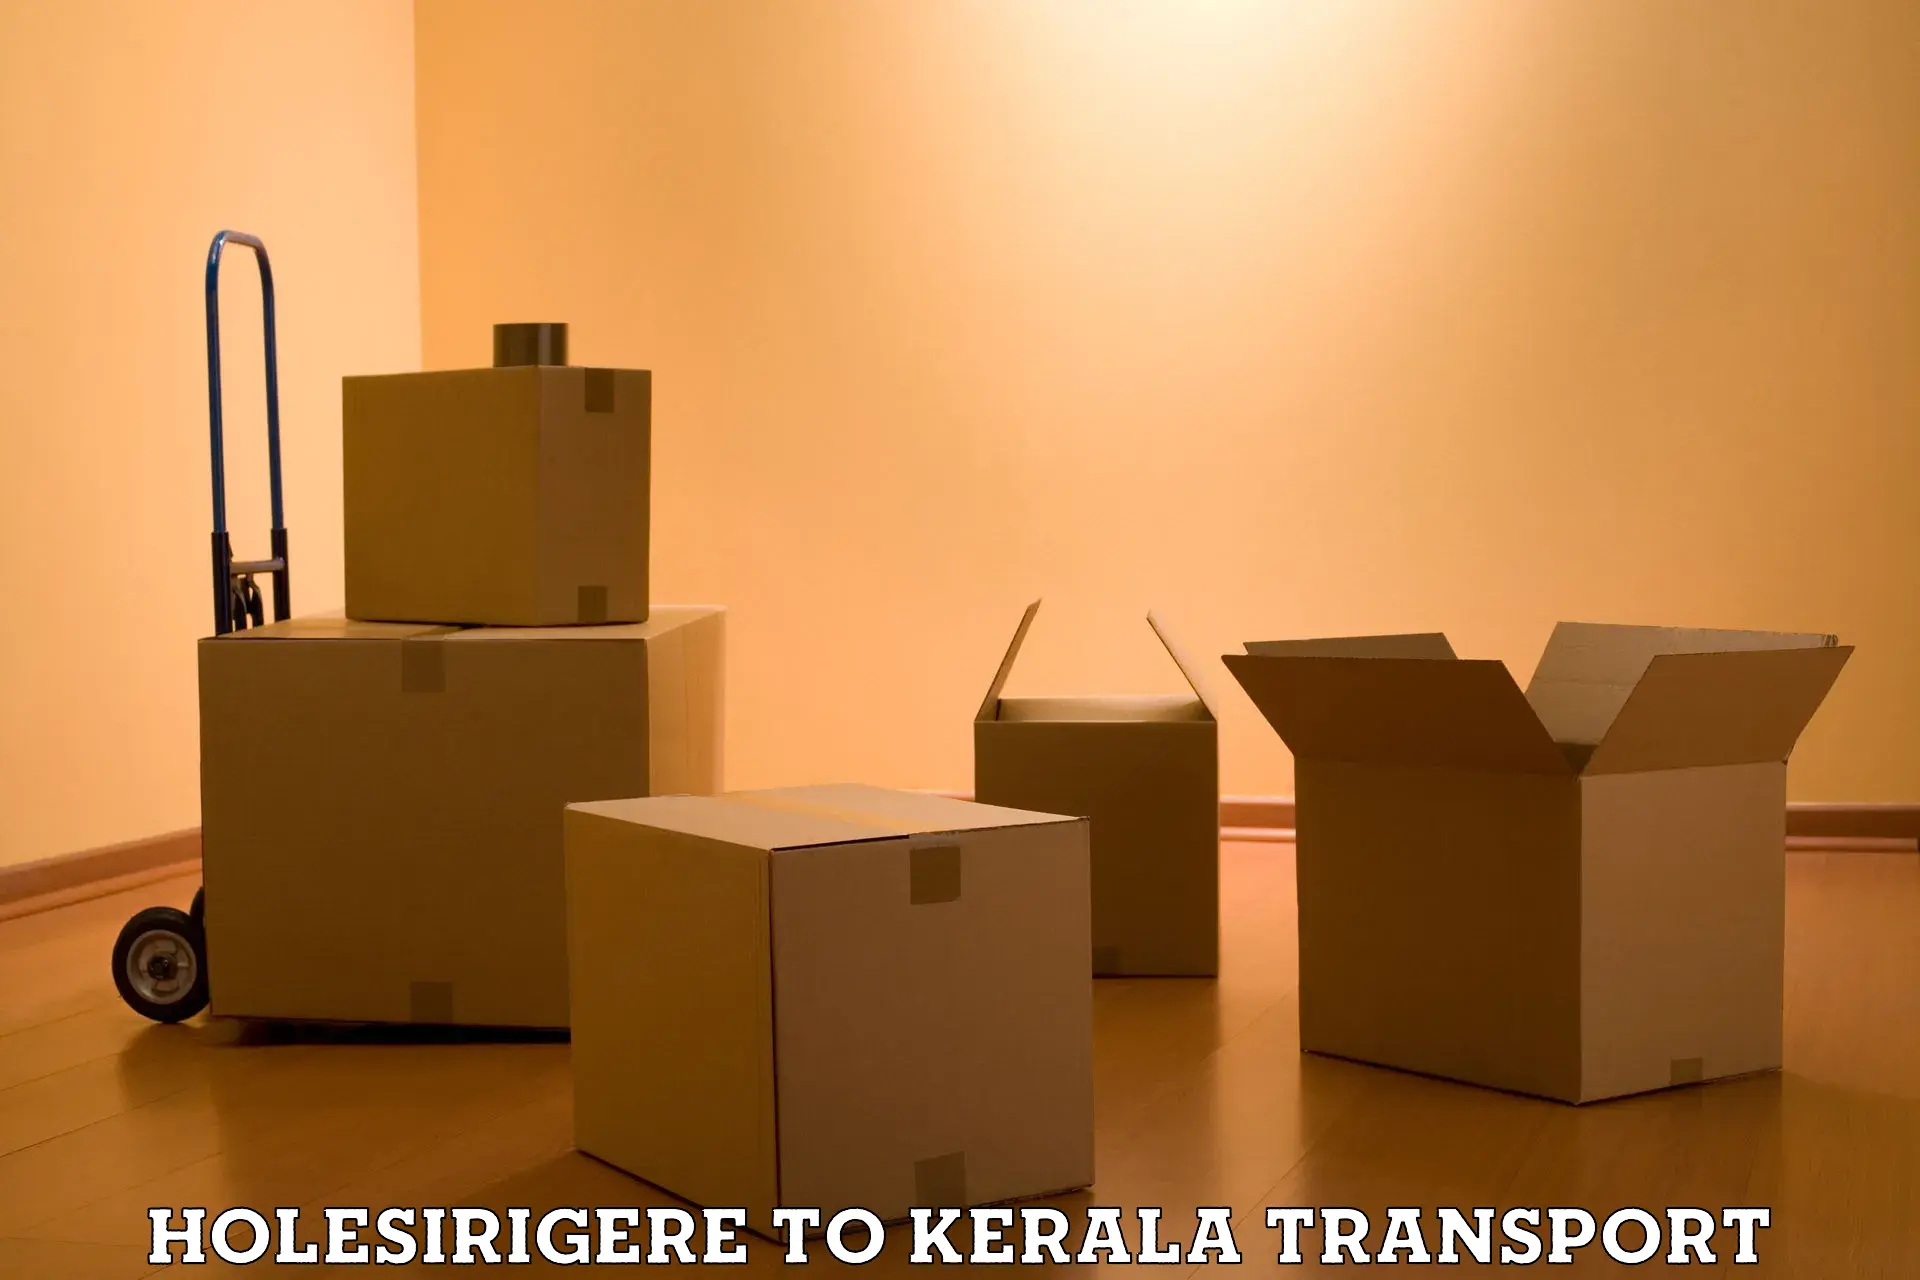 Delivery service Holesirigere to Kerala